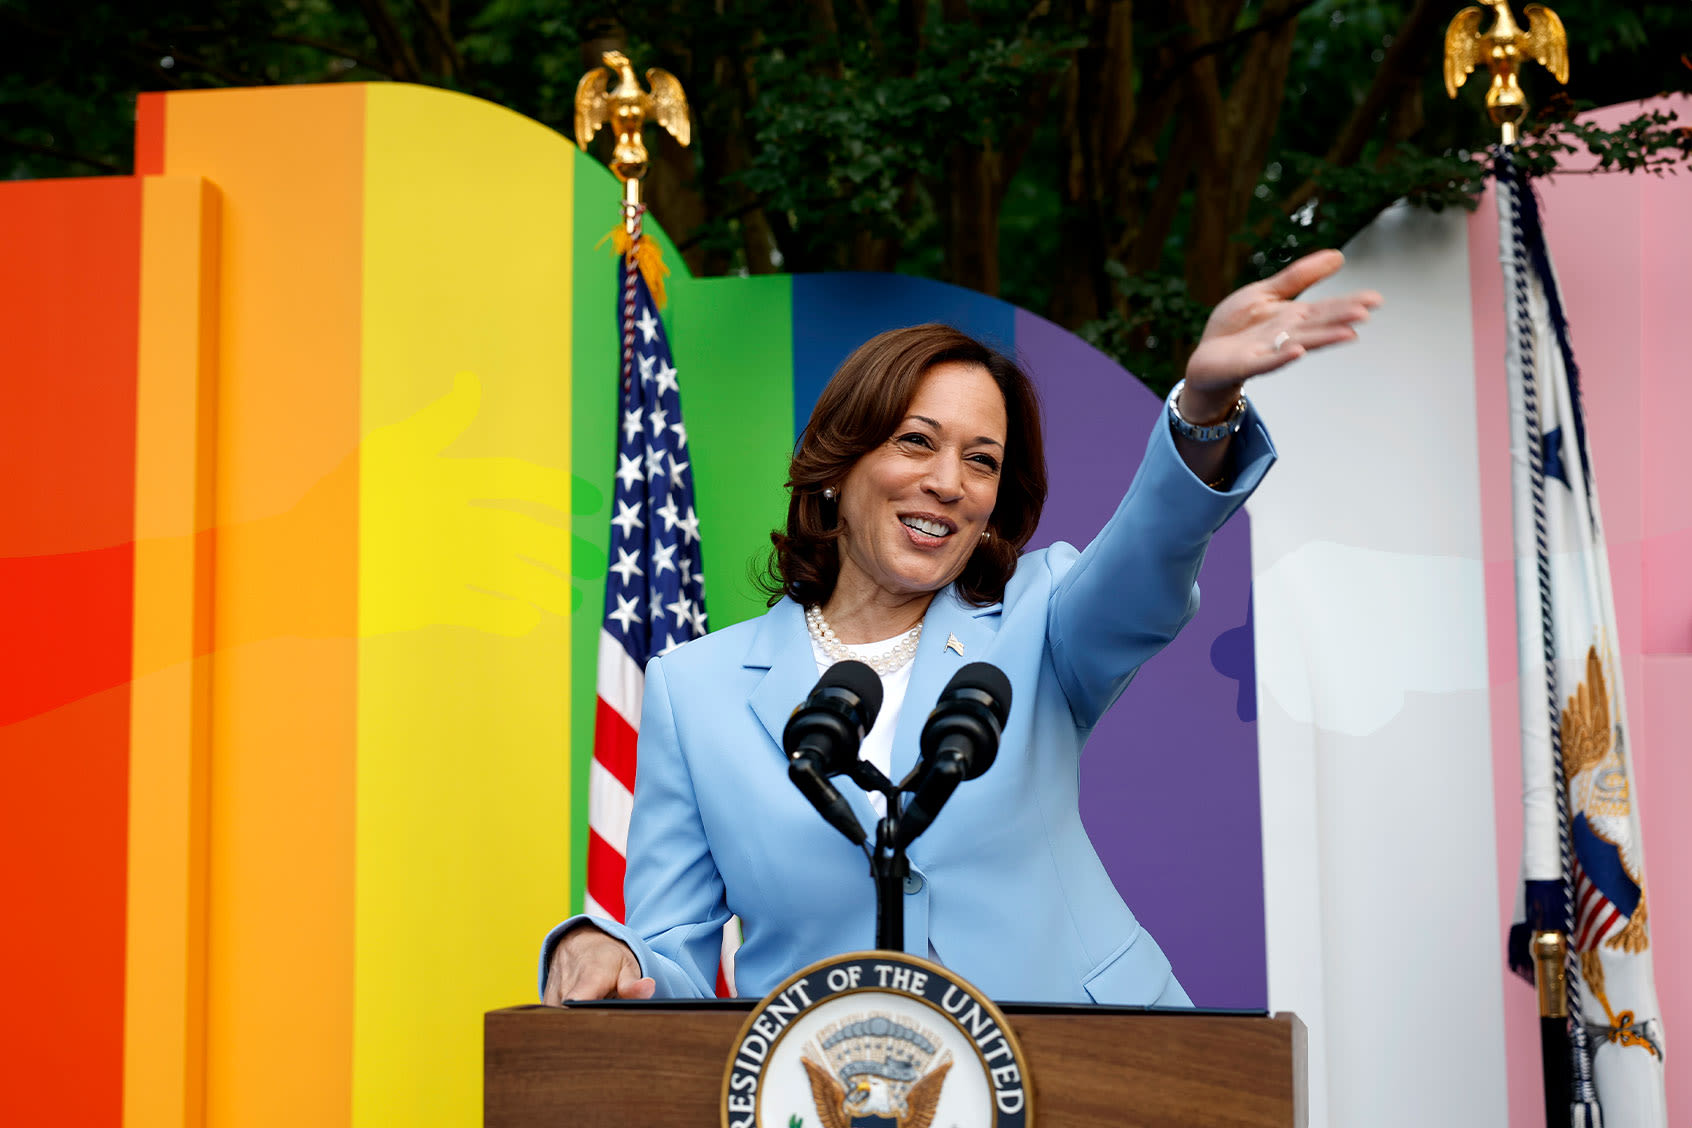 In her national debut Kamala Harris was better TV than Donald Trump's rerun. Can she keep it up?